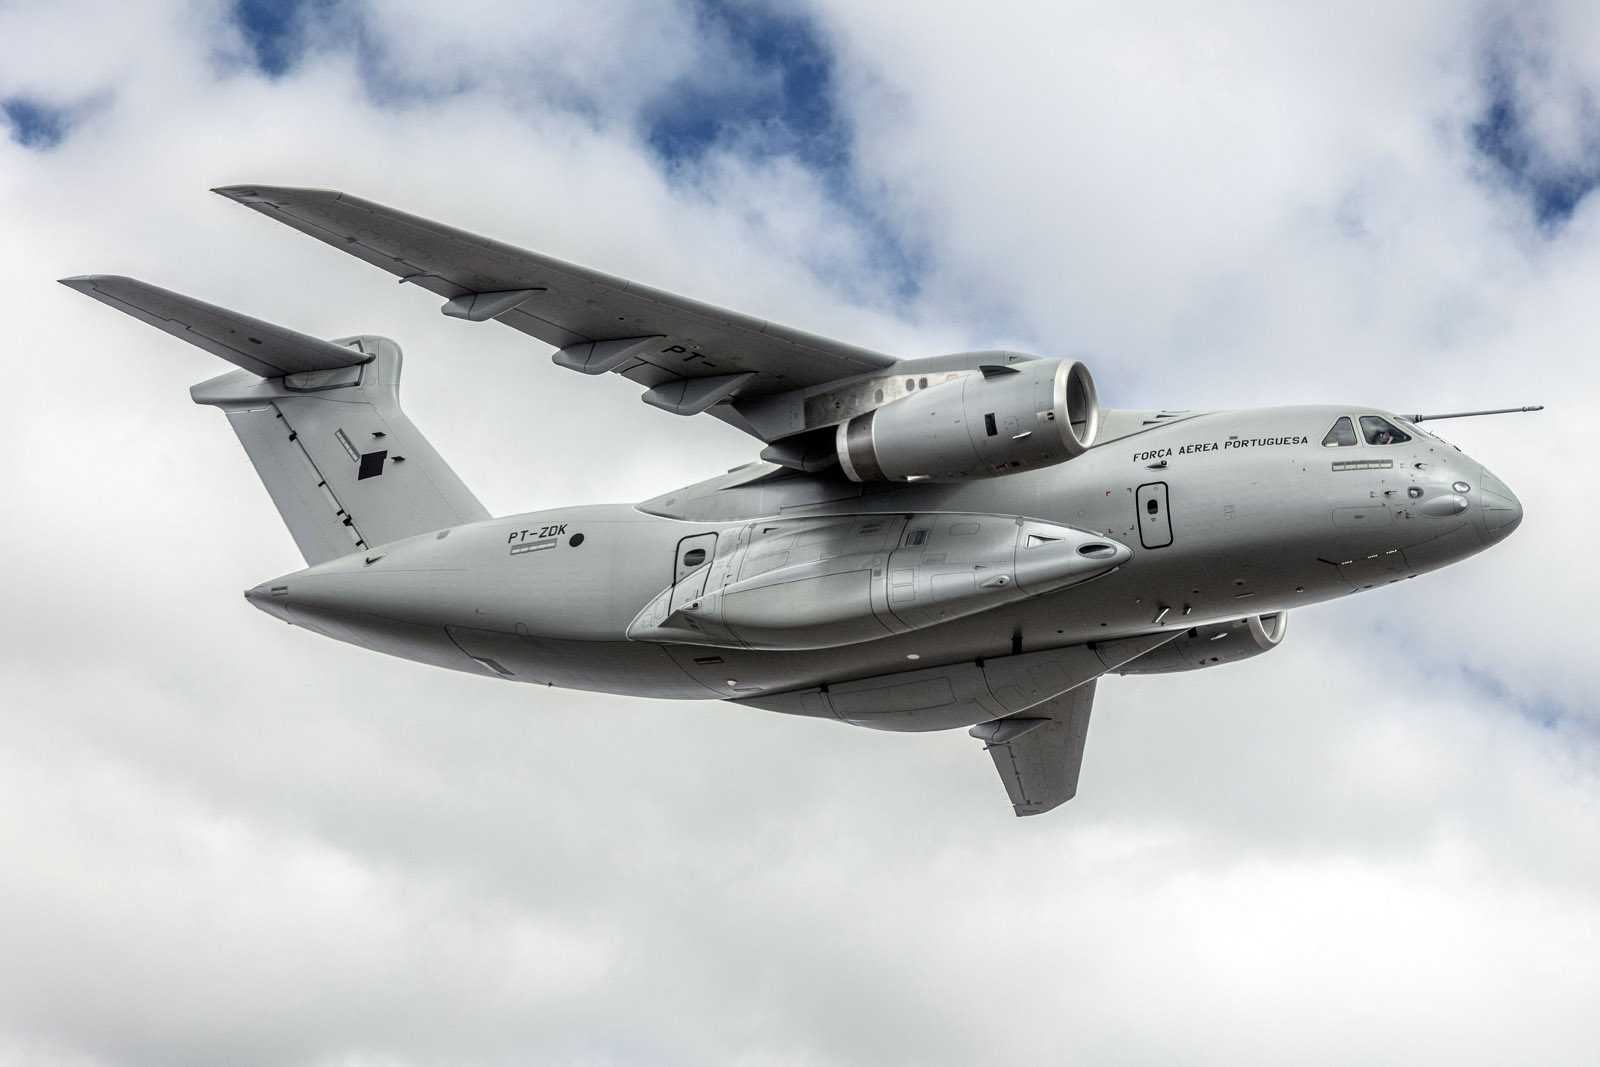 KC-390 Millenium for Portugal_Embraer_ Airspace Review